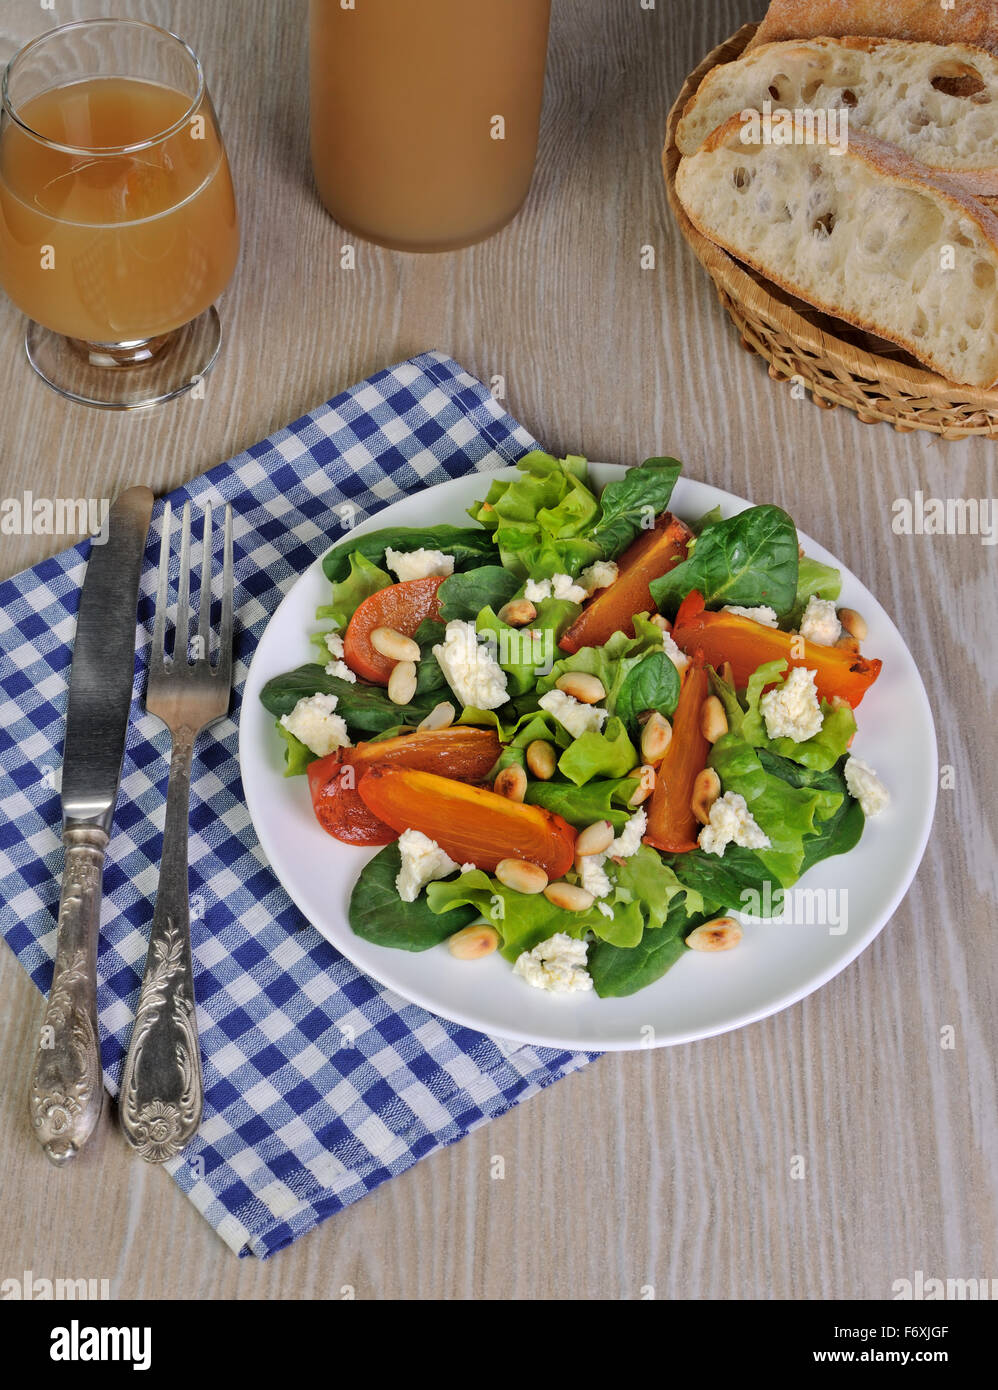 Fresh salad mix with persimmons, feta cheese and peanuts Stock Photo